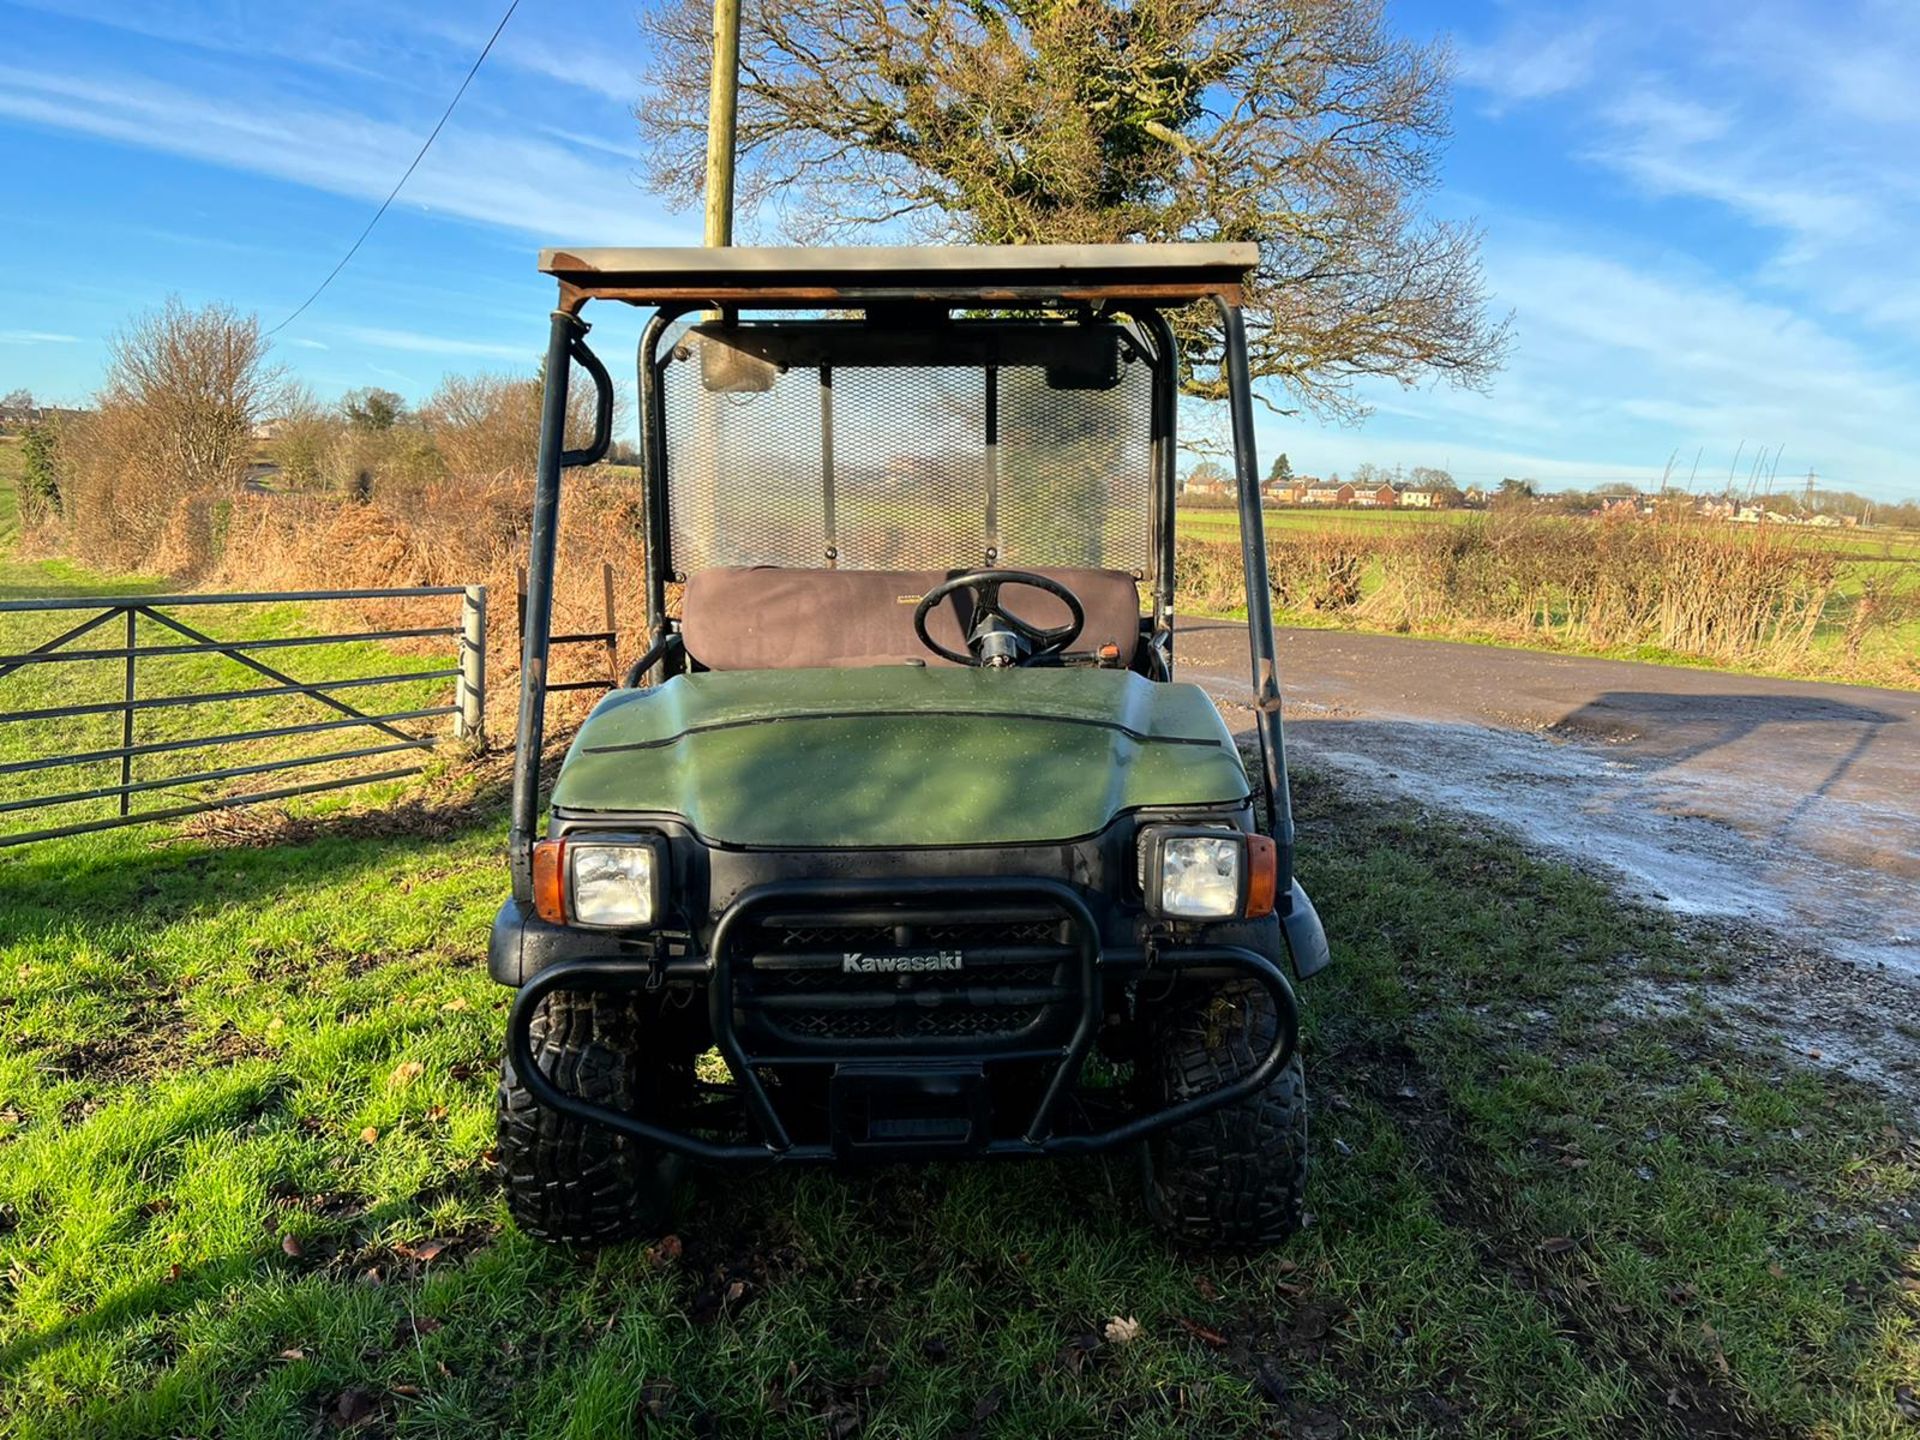 KAWASAKI MULE 3010 4WD BUGGI, RUNS AND DRIVES, SHOWING A LOW 2256 HOURS, ROAD REGISTERED *PLUS VAT* - Image 2 of 13